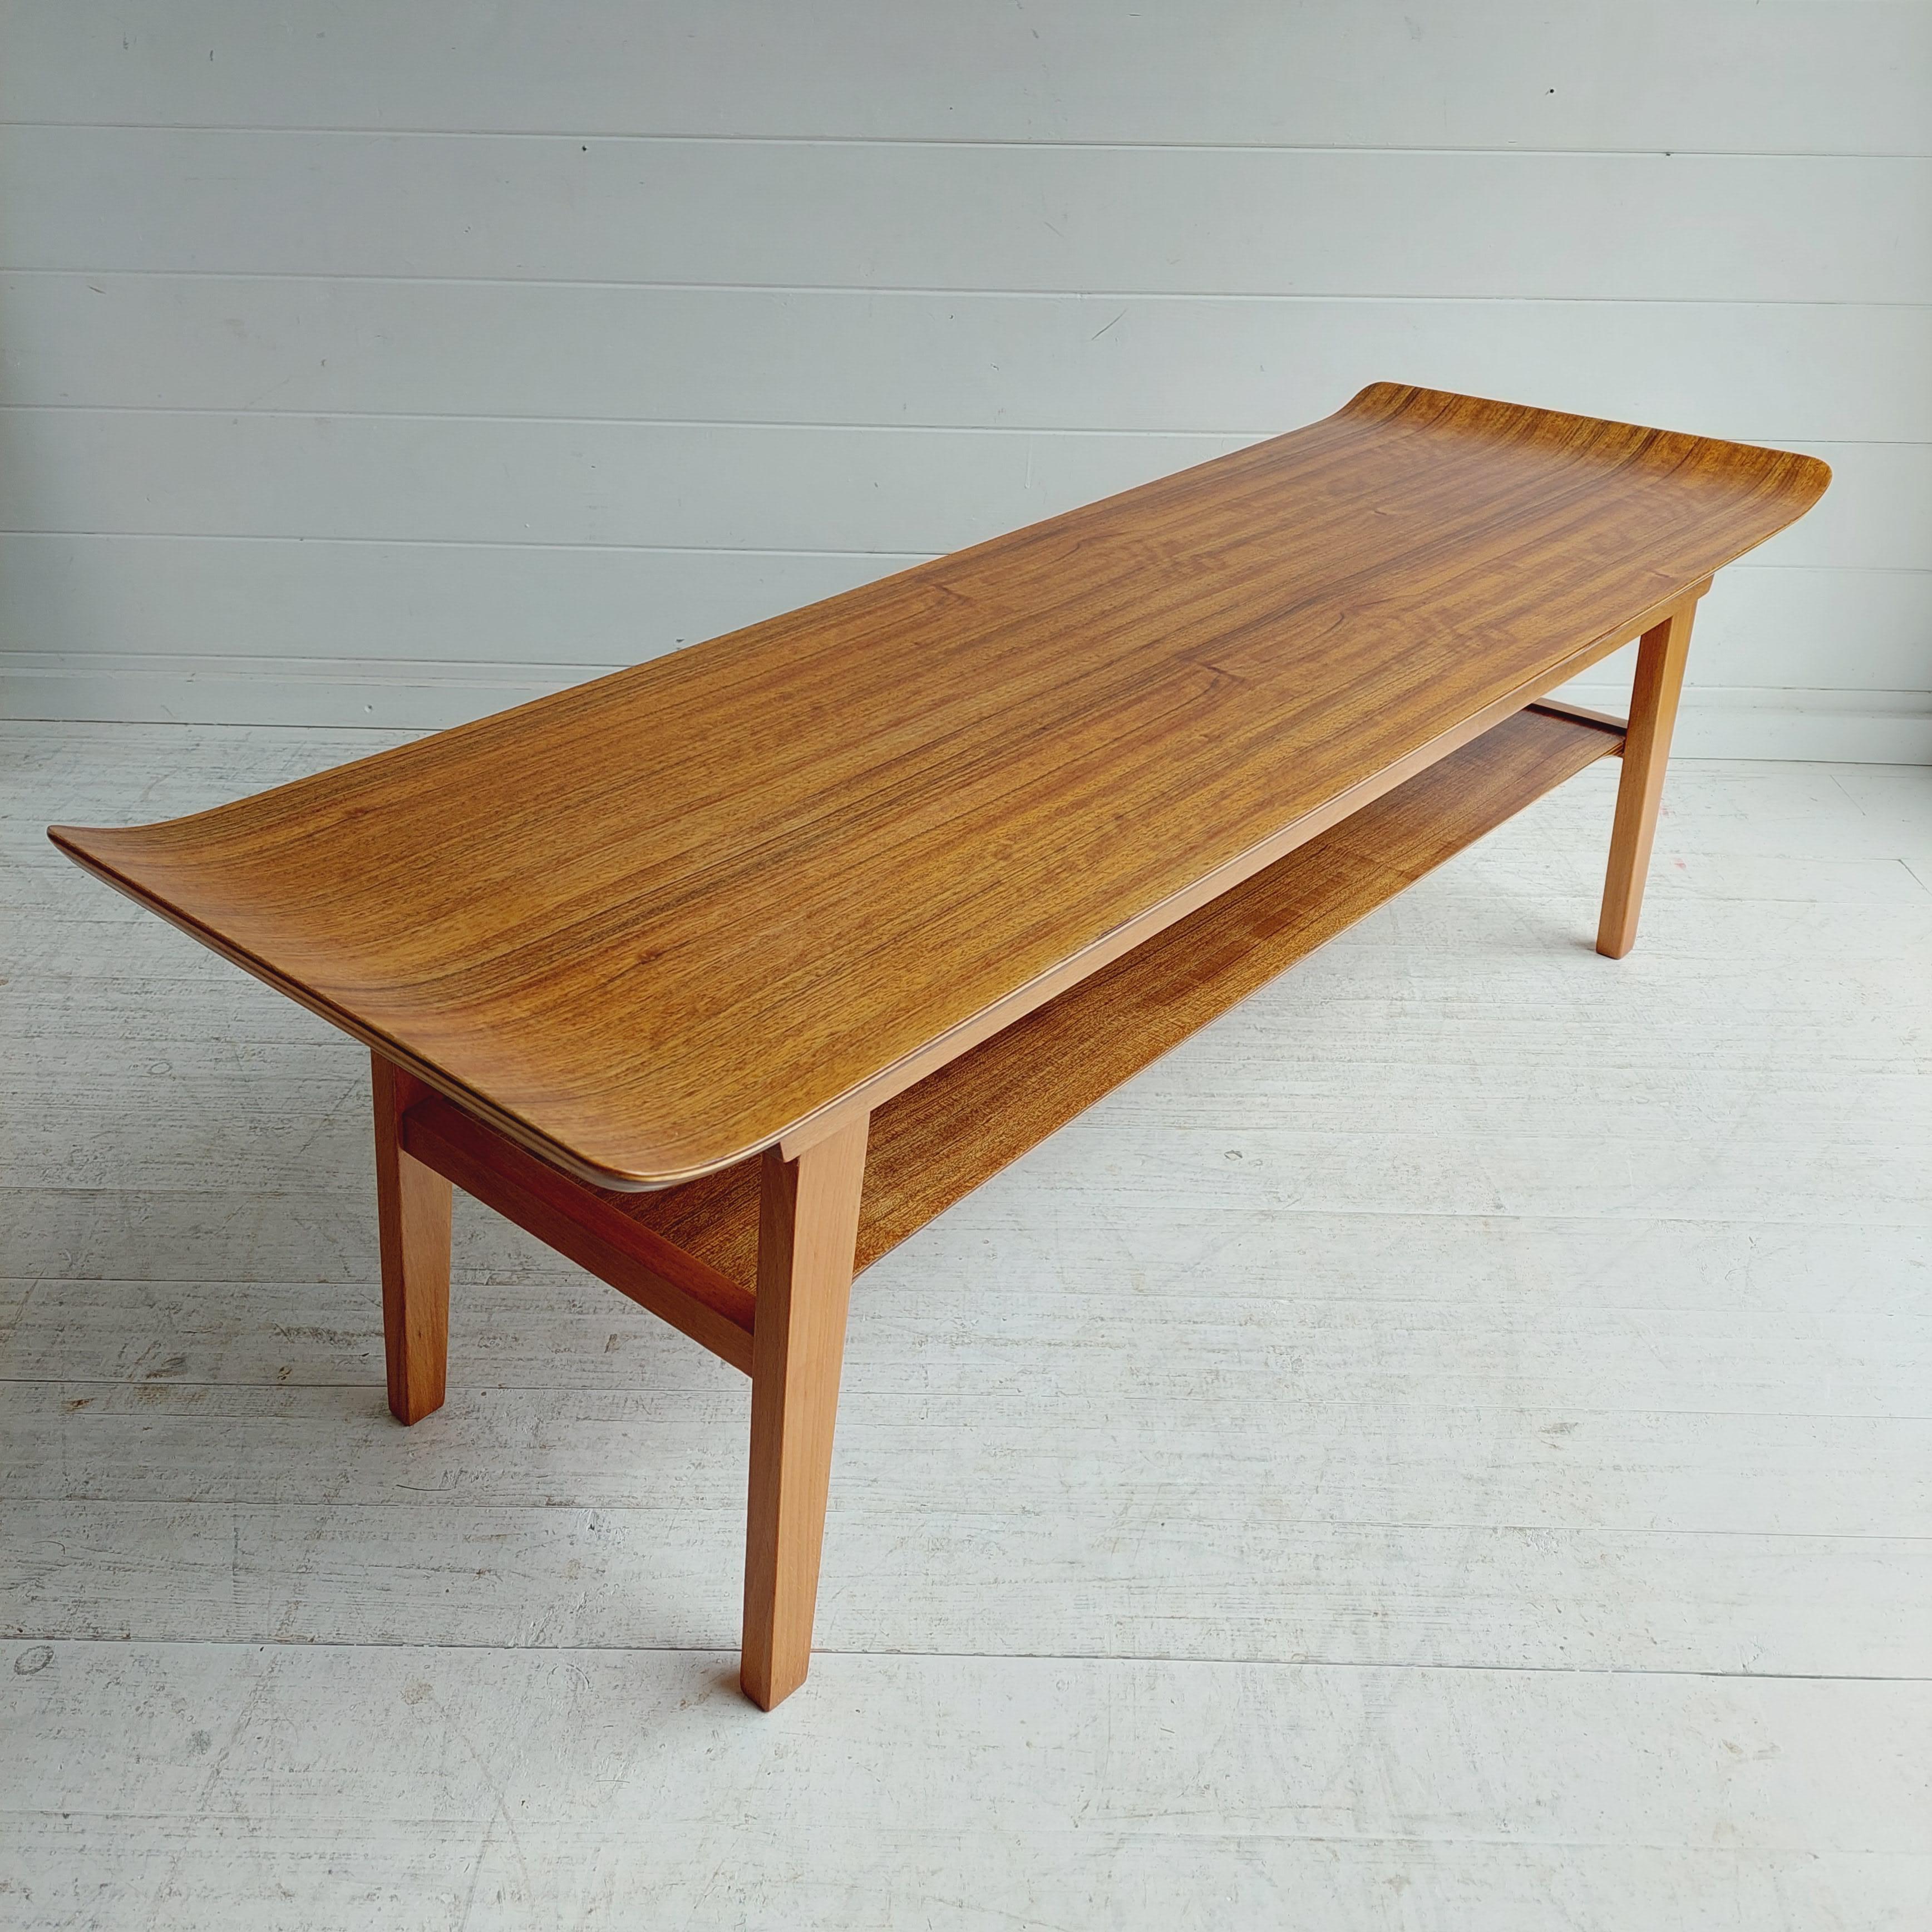 A 1950/60’s ‘Ski’ form coffee table by Ewart Myer for Horatio Myer and Co
Two tier with a sleigh walnut bentwood top and magazine rack shelf to the bottom. 

Ewart designs a rather unique coffee table. 
Taking inspiration during the height of the